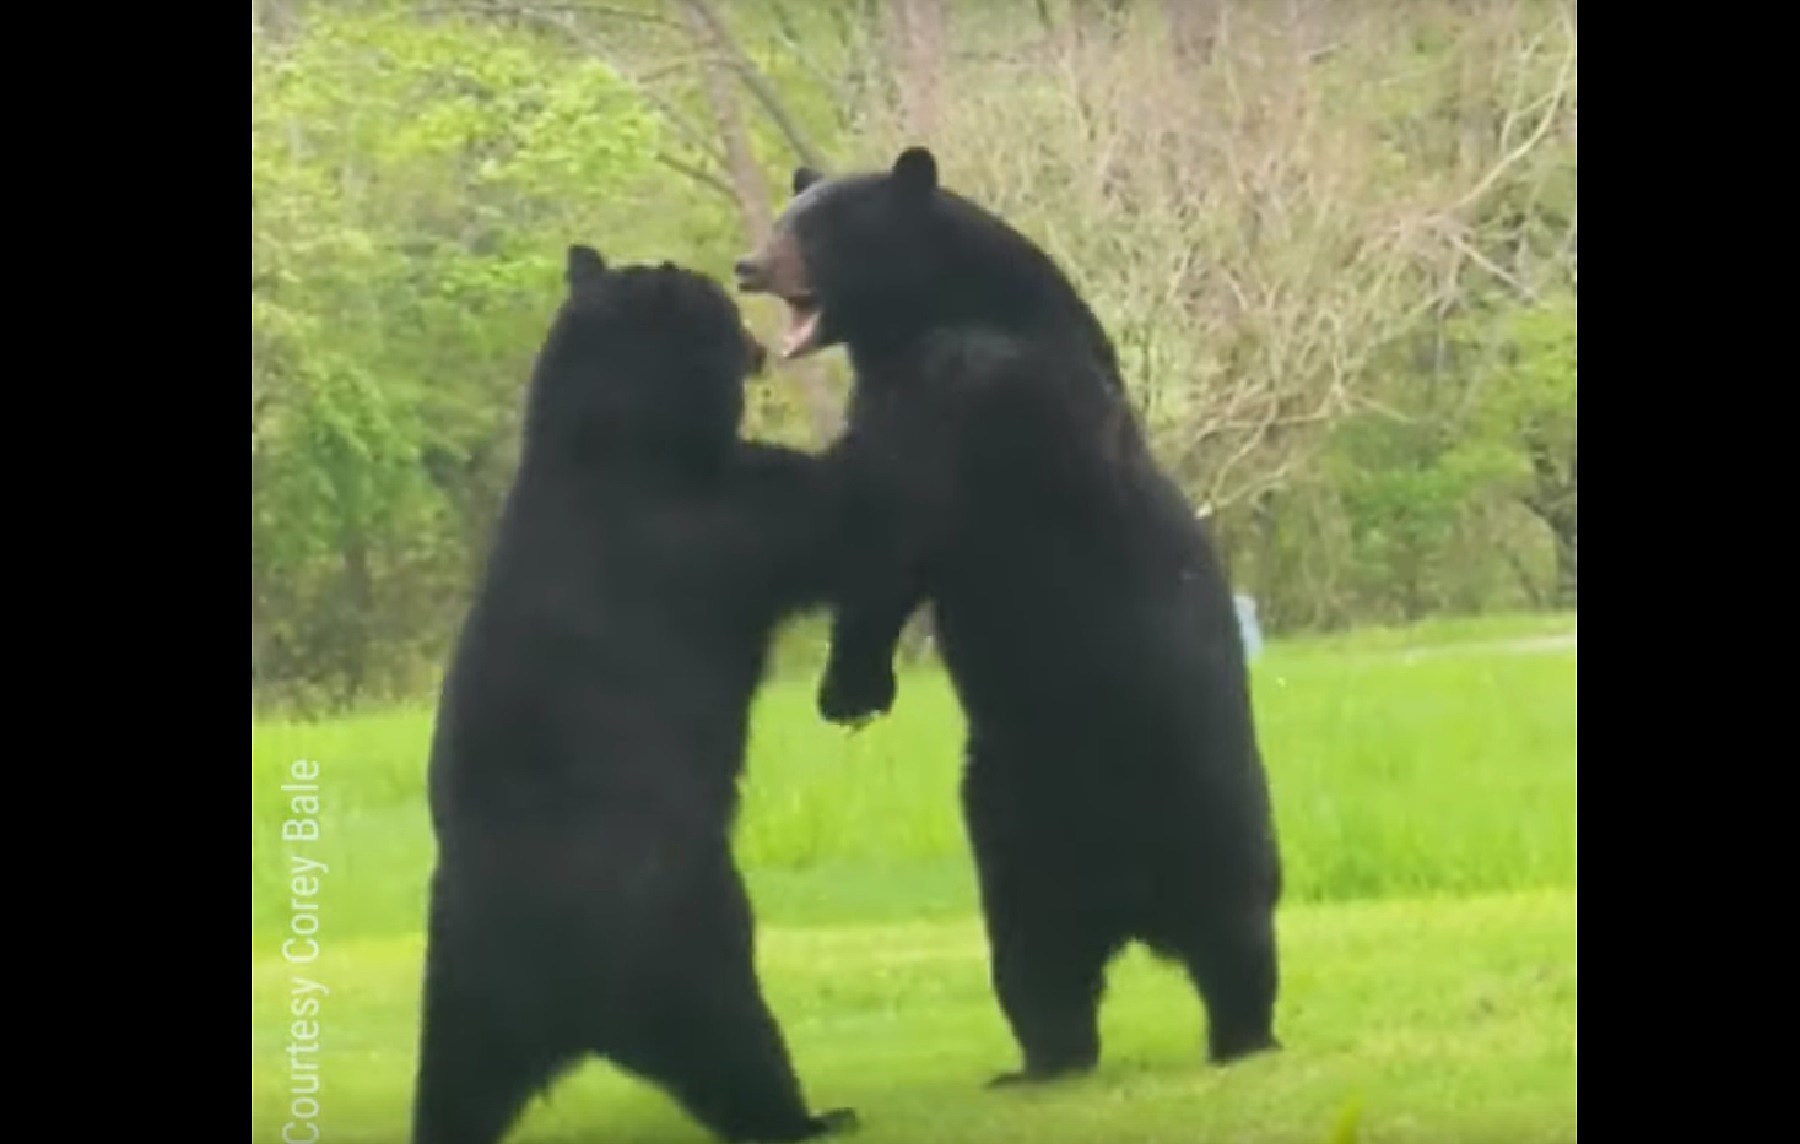 Bears brawling on front lawn caught on video